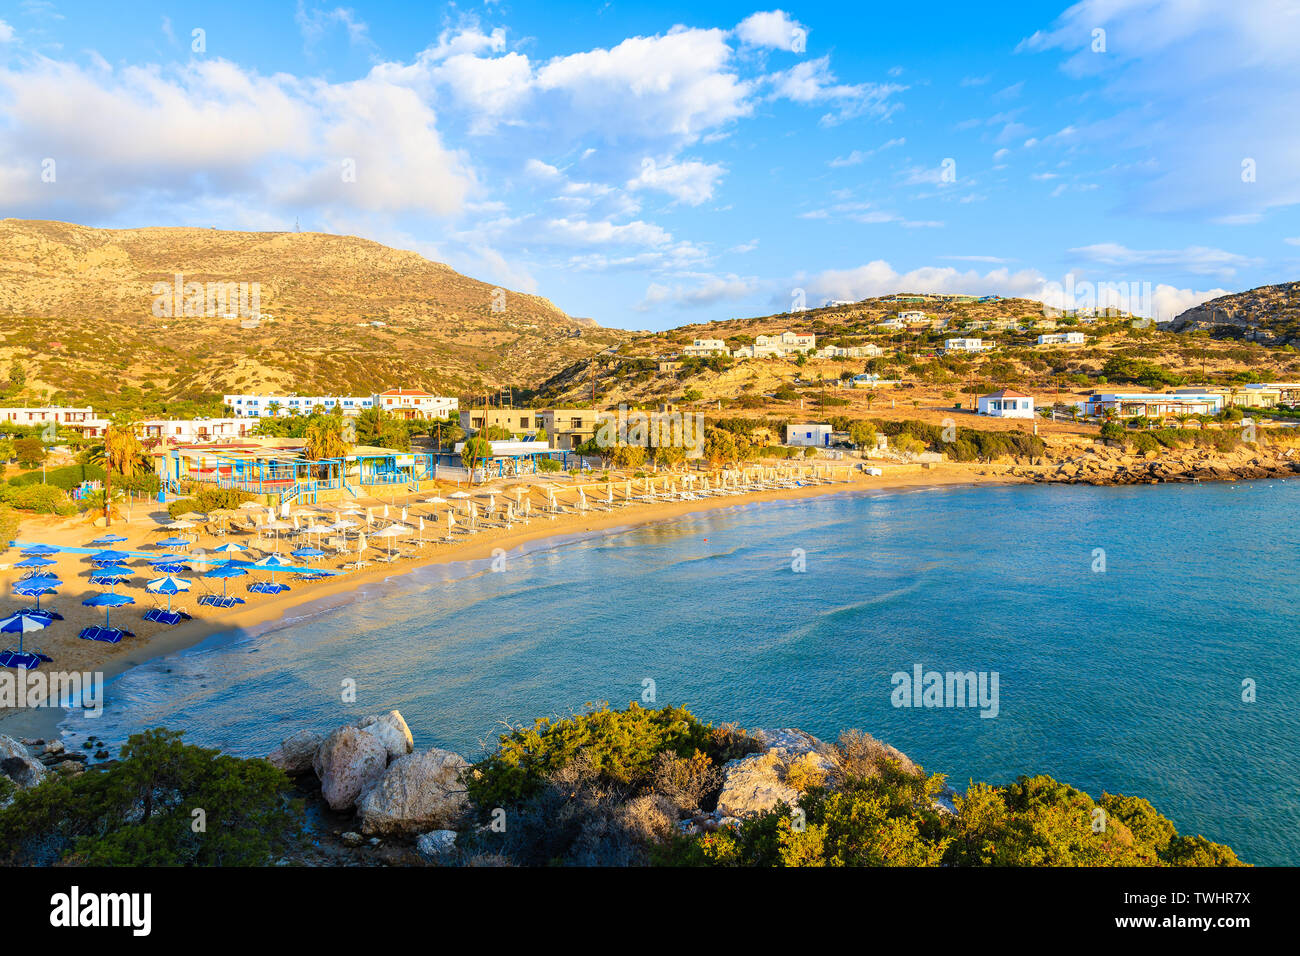 Amazing bay with beach in Ammopi village at sunset time, Karpathos island, Greece Stock Photo